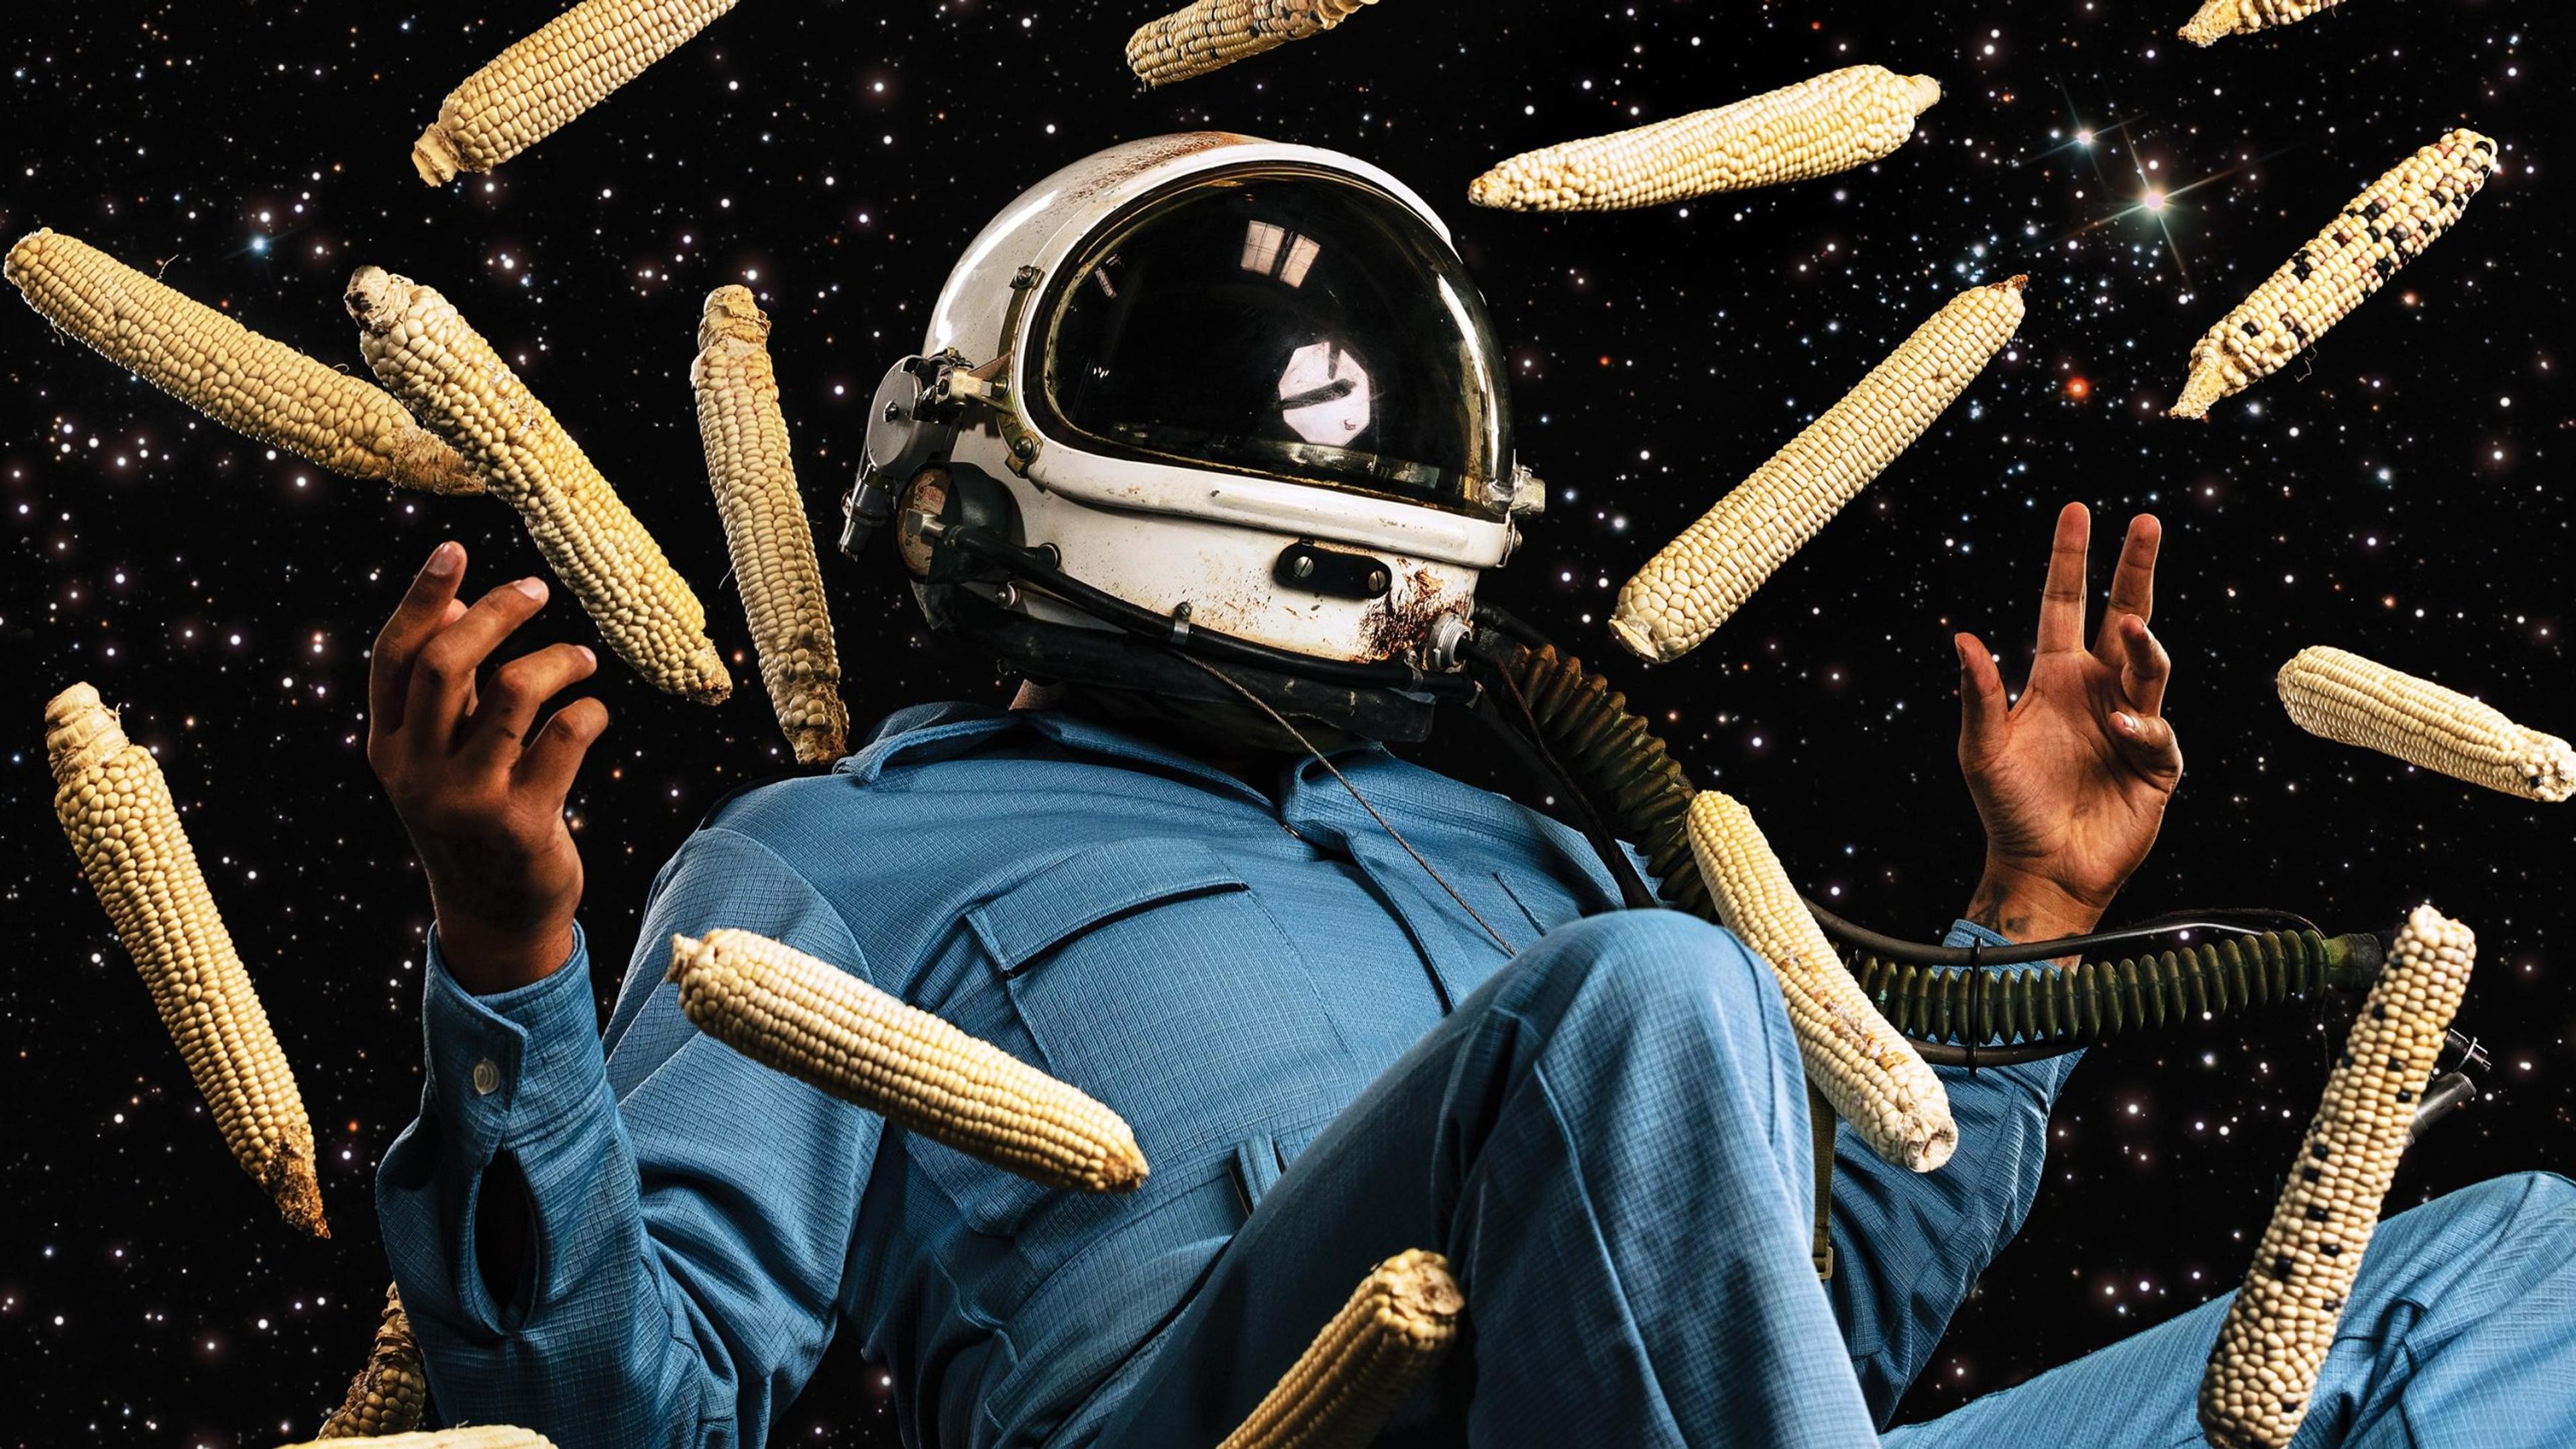 A photographic artwork of a man in a blue space suit and helmet is suspended in the air, surrounded by floating corn cobs